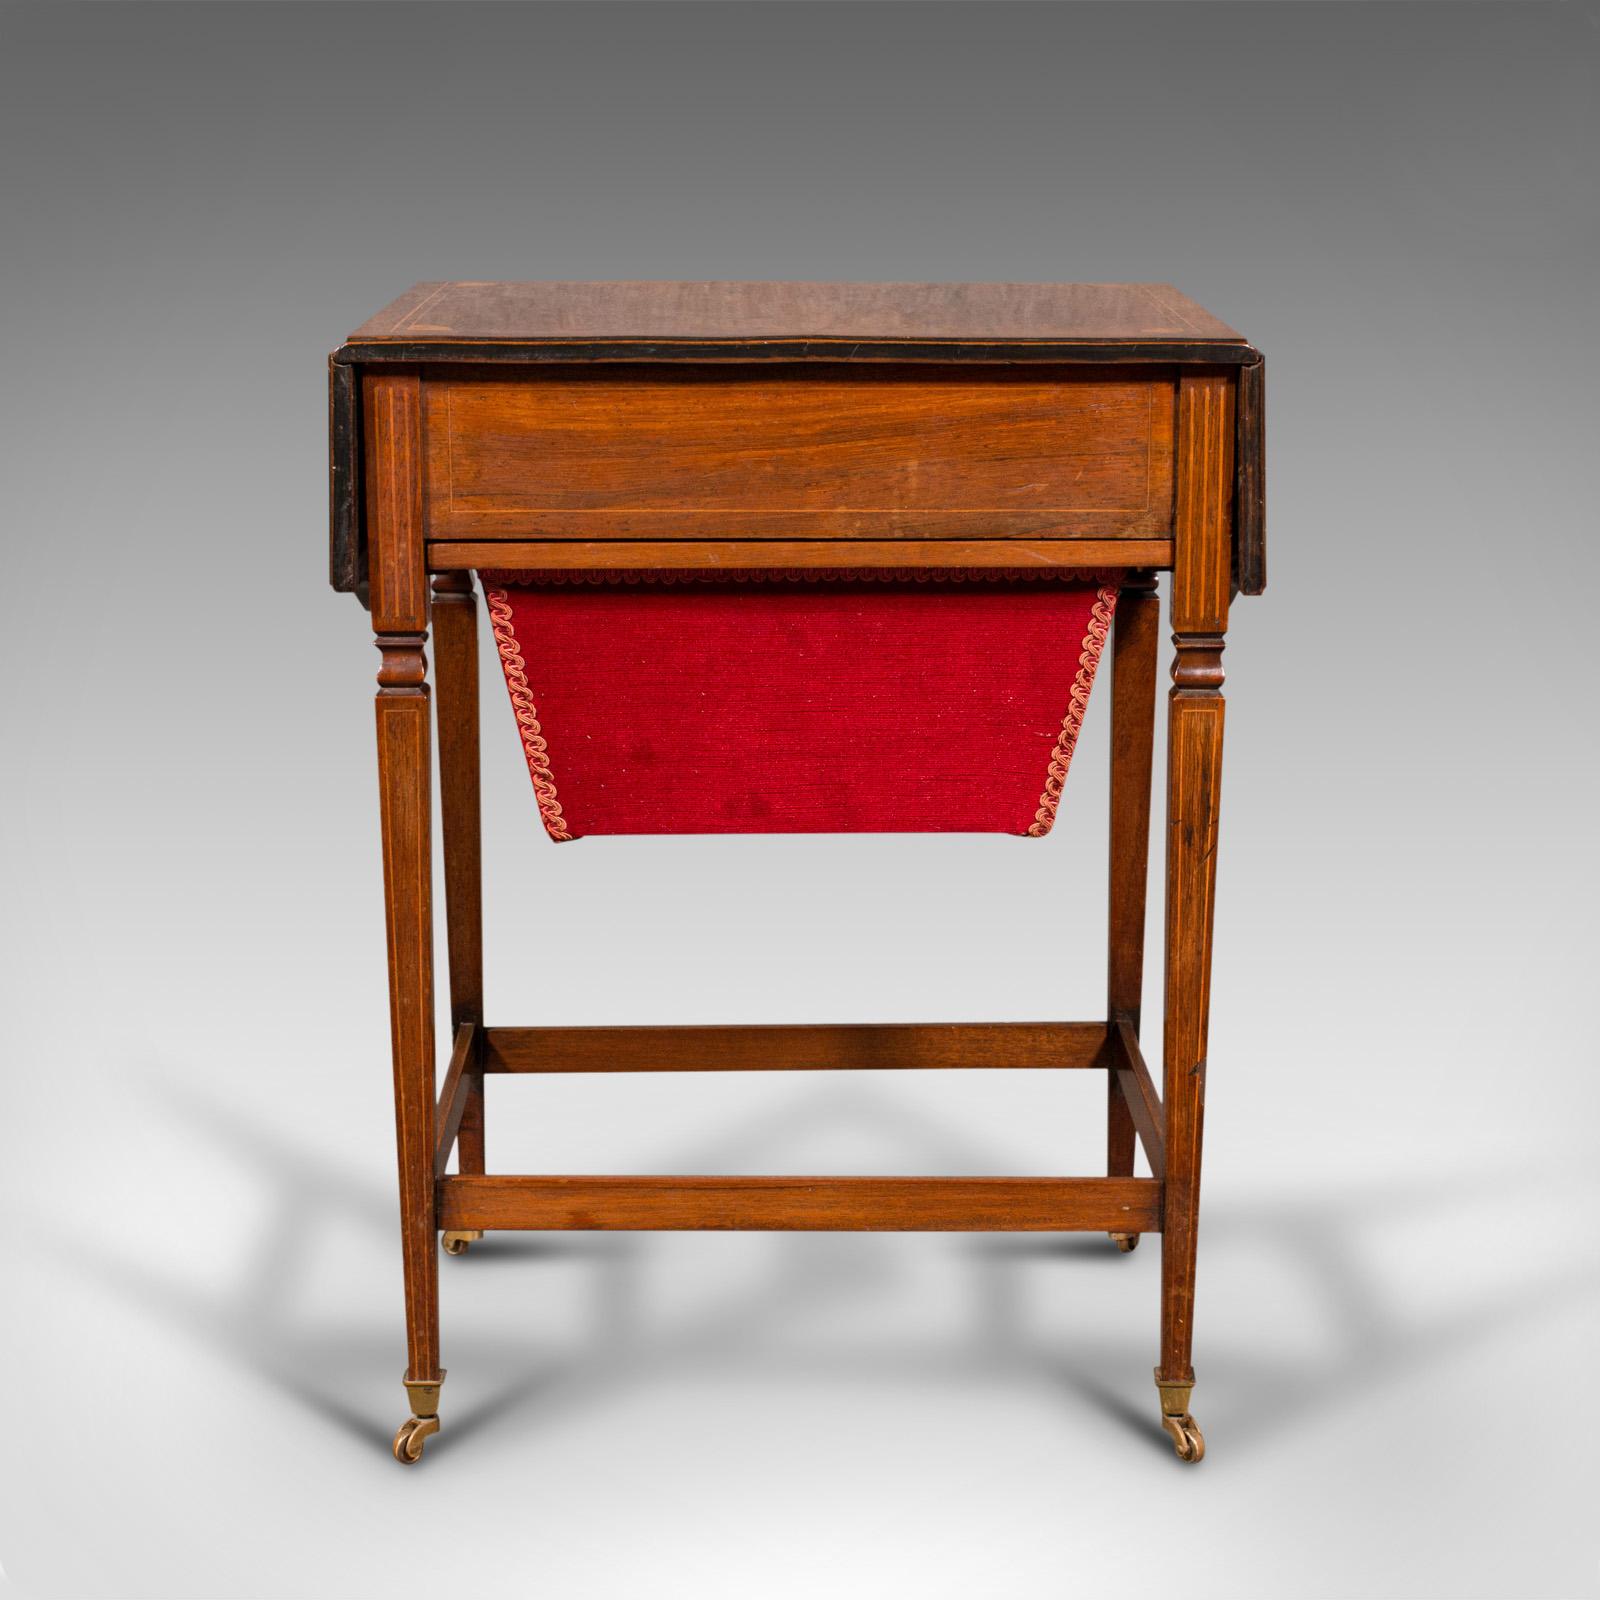 British Antique Drop Leaf Sewing Table, English, Rosewood, Side, Lamp, Regency, C.1820 For Sale